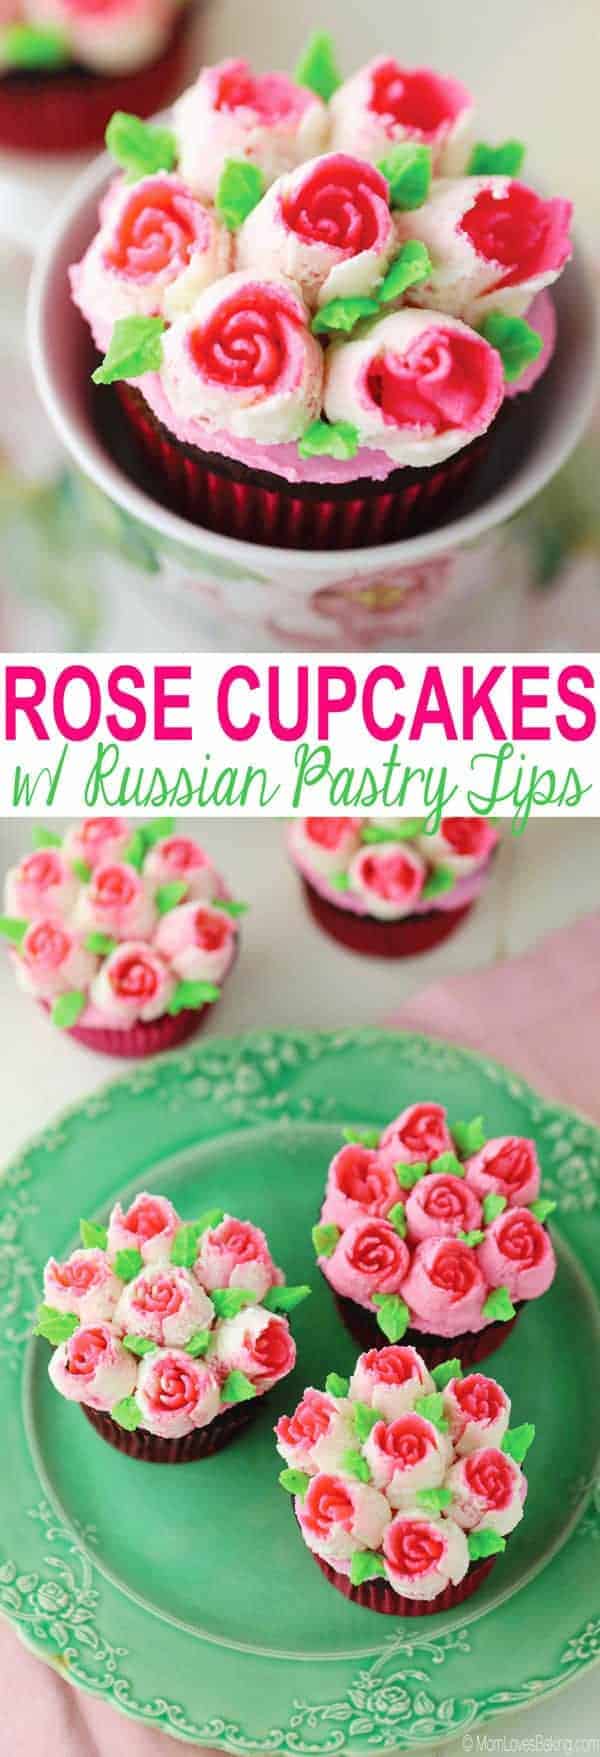 Buttercream roses with Russian pastry tips